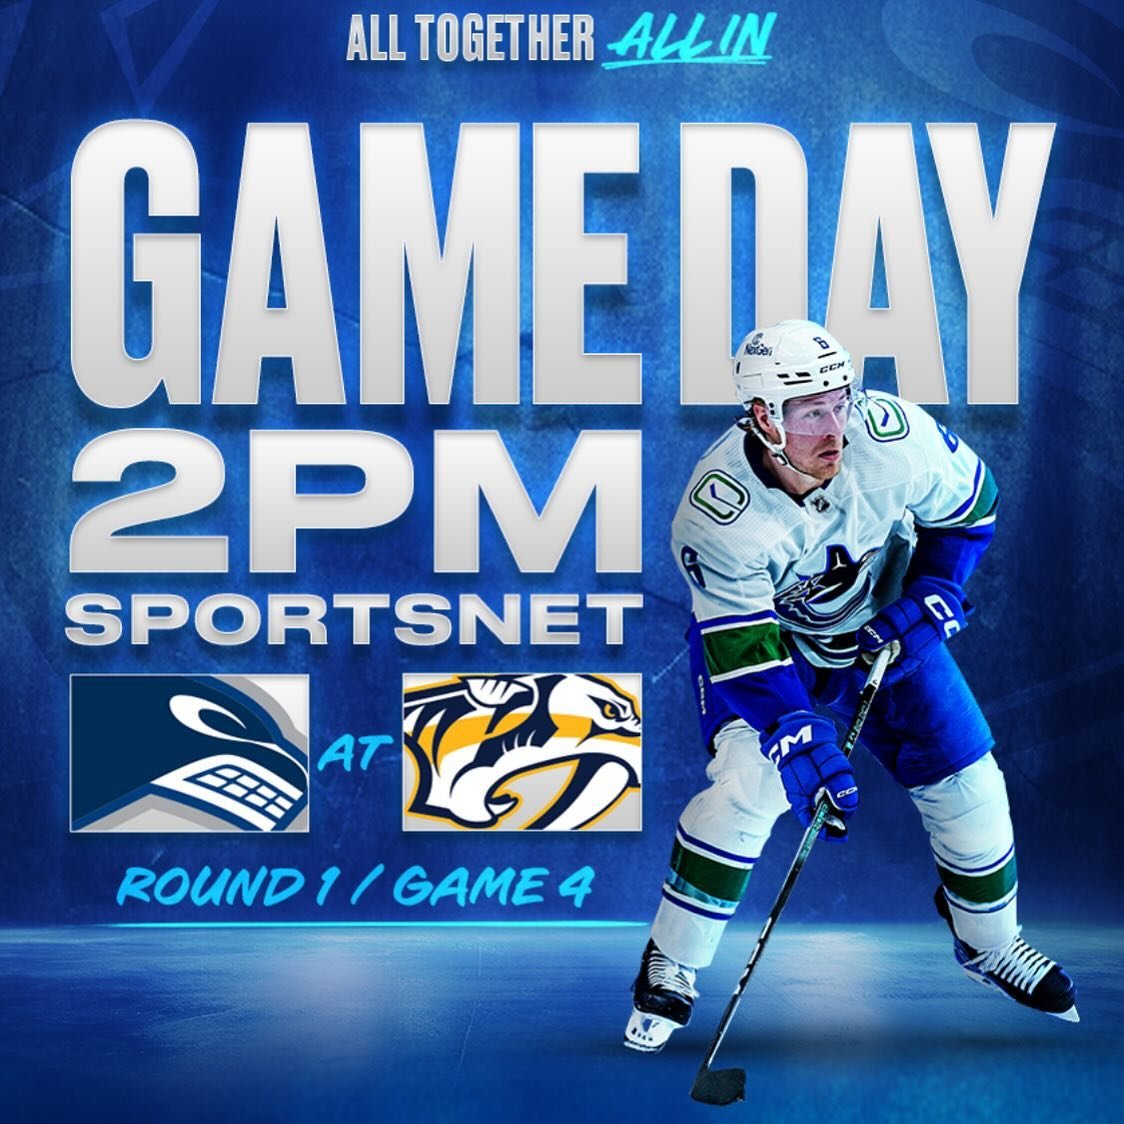 UP AND AT &rsquo;EM!

BIG DAY! We&rsquo;re open early at 1:30 p.m. and showing the @canucks / Nashville Game Four at 2 p.m. with full sound and food &amp; drink features including rotating varieties of our famous free-range chicken wings and game-day